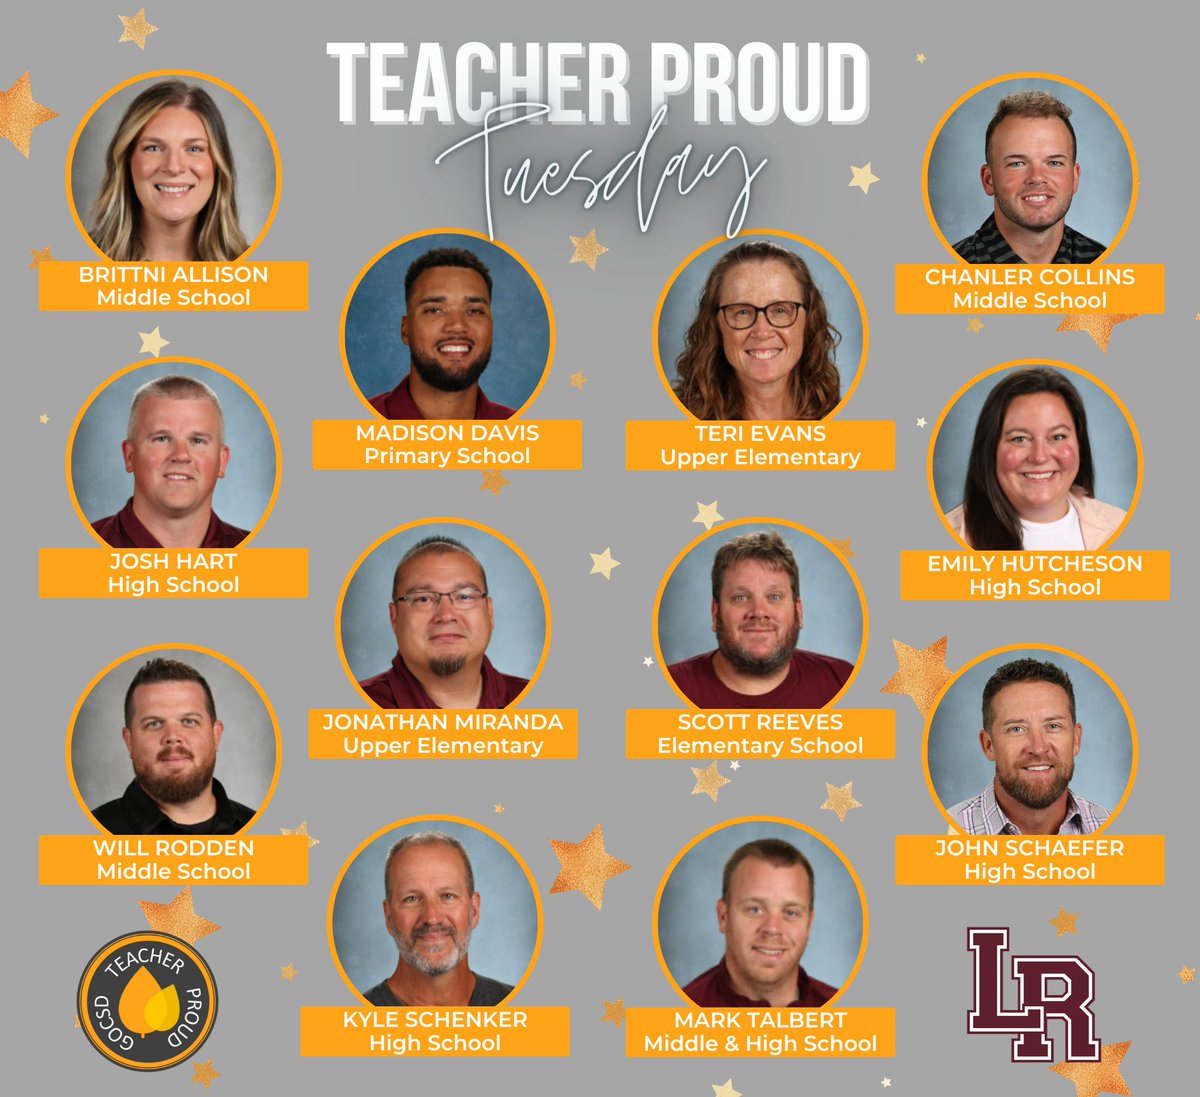 It's Teacher Proud Tuesday! This month, let's celebrate LR's outstanding physical education teachers. We are proud of these educators and their commitment to fostering a healthy and active lifestyle among students! #WeAreLR #TeacherProud @GOCSDMO